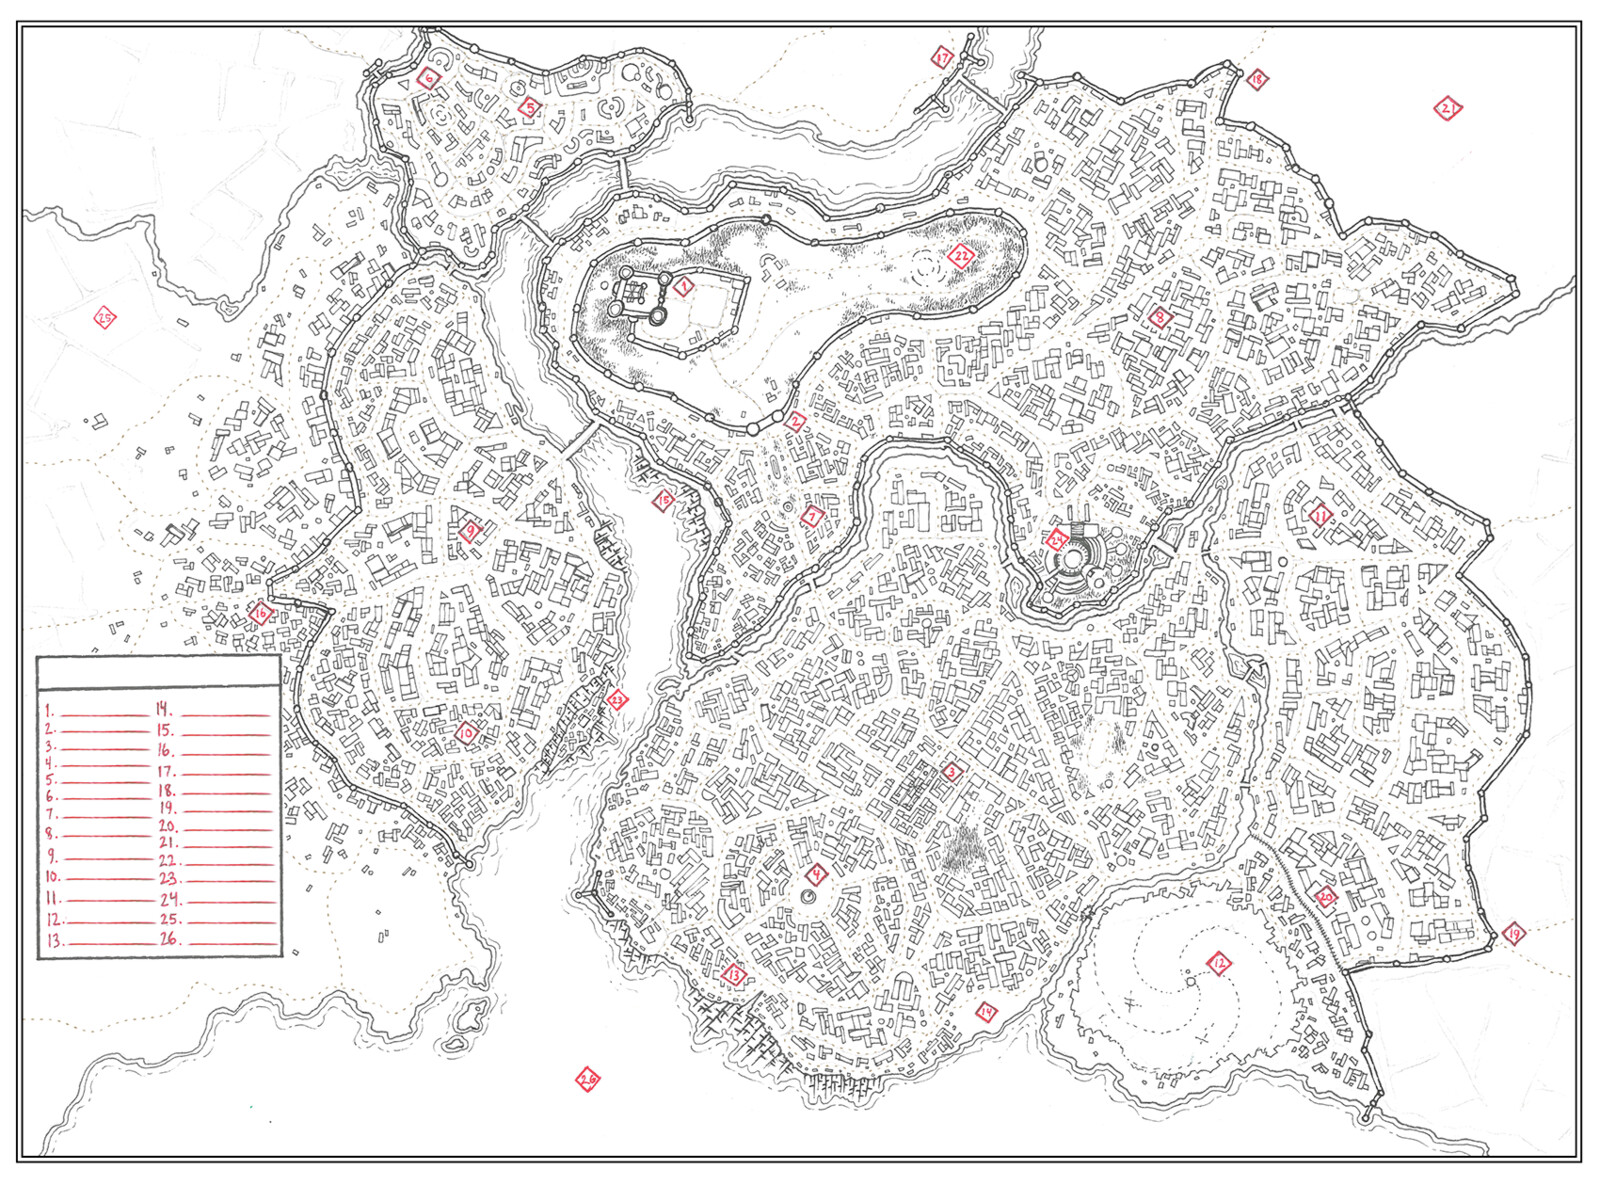 Fill-In the City Map